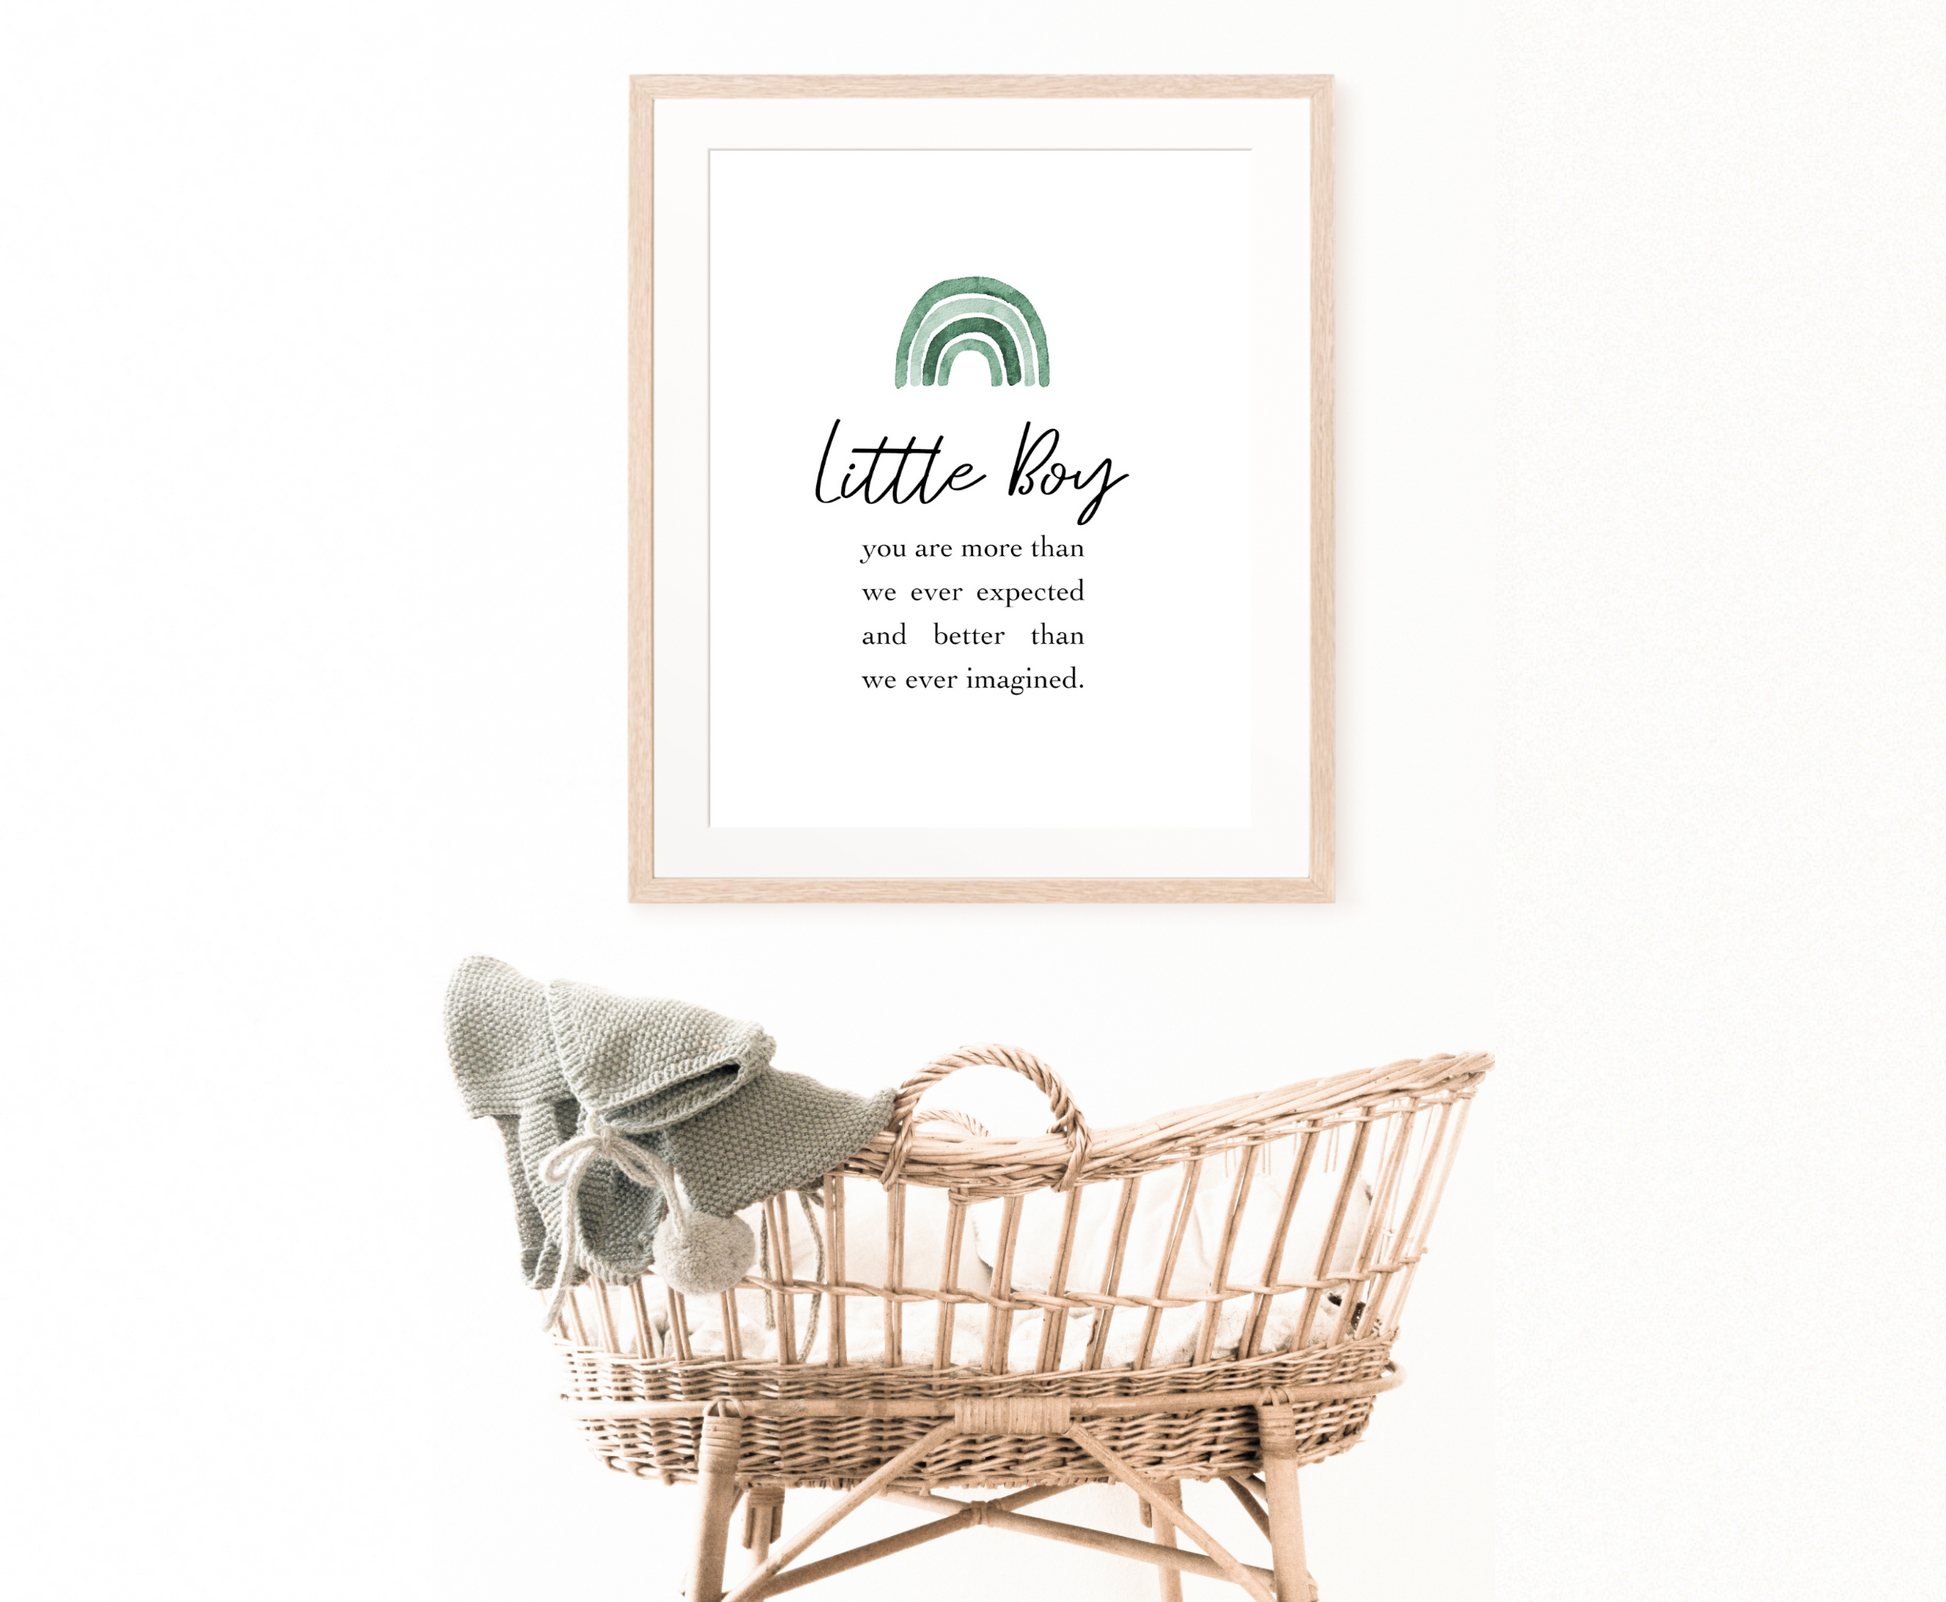 An image of a cradle with a frame hanging on the wall behind it. The frame shows a graphic for a little boy’s room displaying a rainbow design in different shades of green  and includes a piece of writing that says: Little boy, you are more than we ever expected and better than we ever imagined.